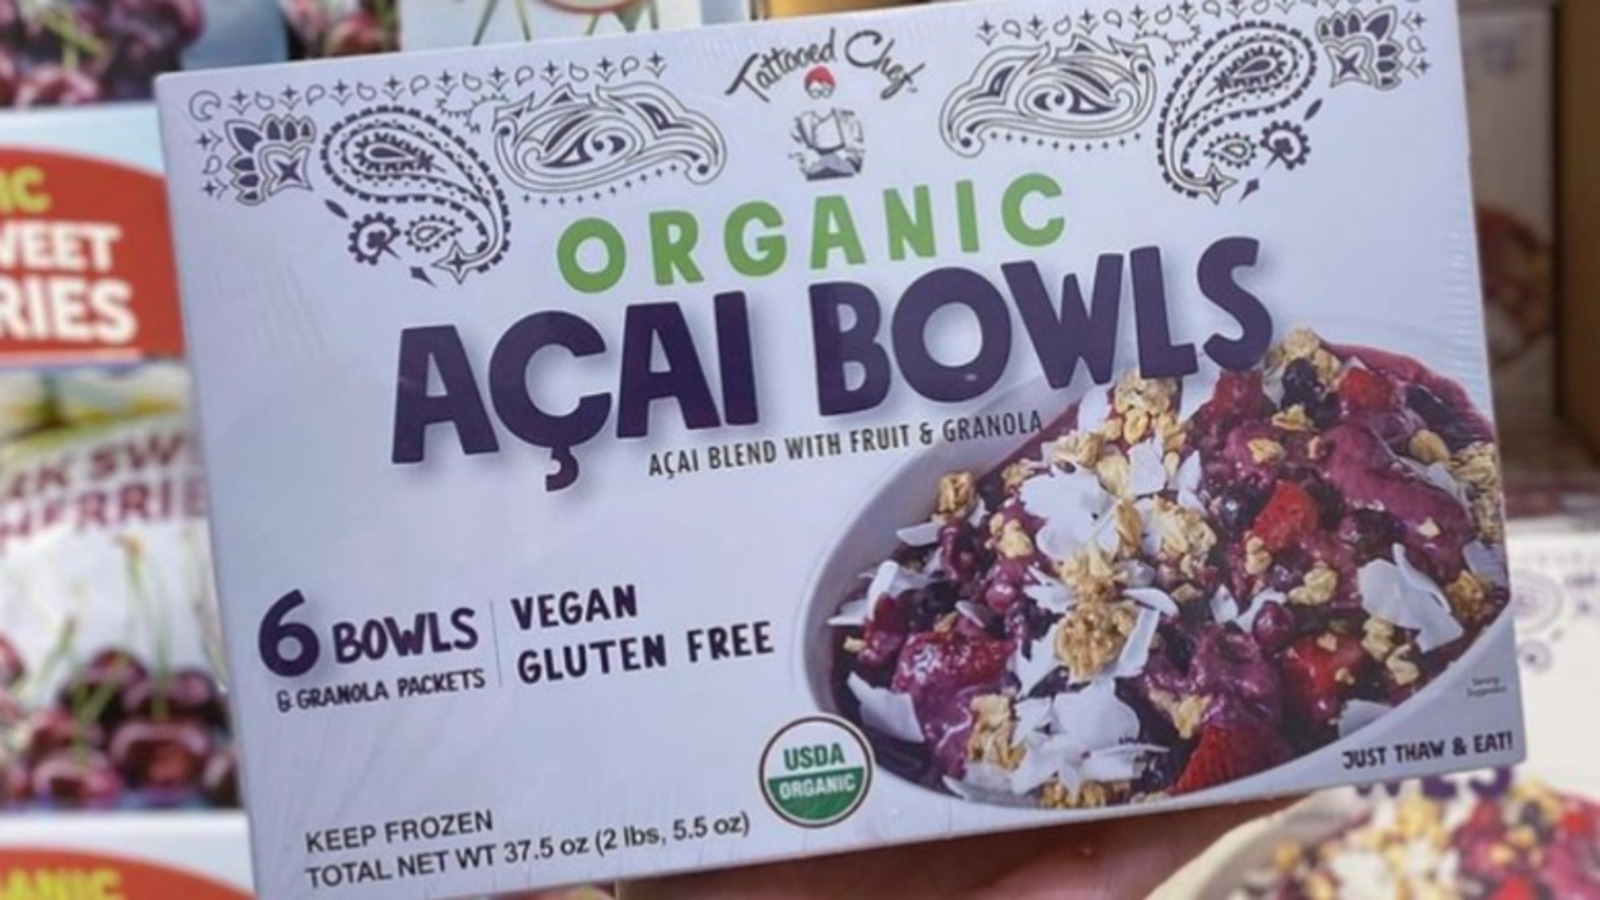 https://www.mashed.com/img/gallery/costco-shoppers-have-mixed-feelings-about-these-organic-acai-bowls/l-intro-1616518701.jpg